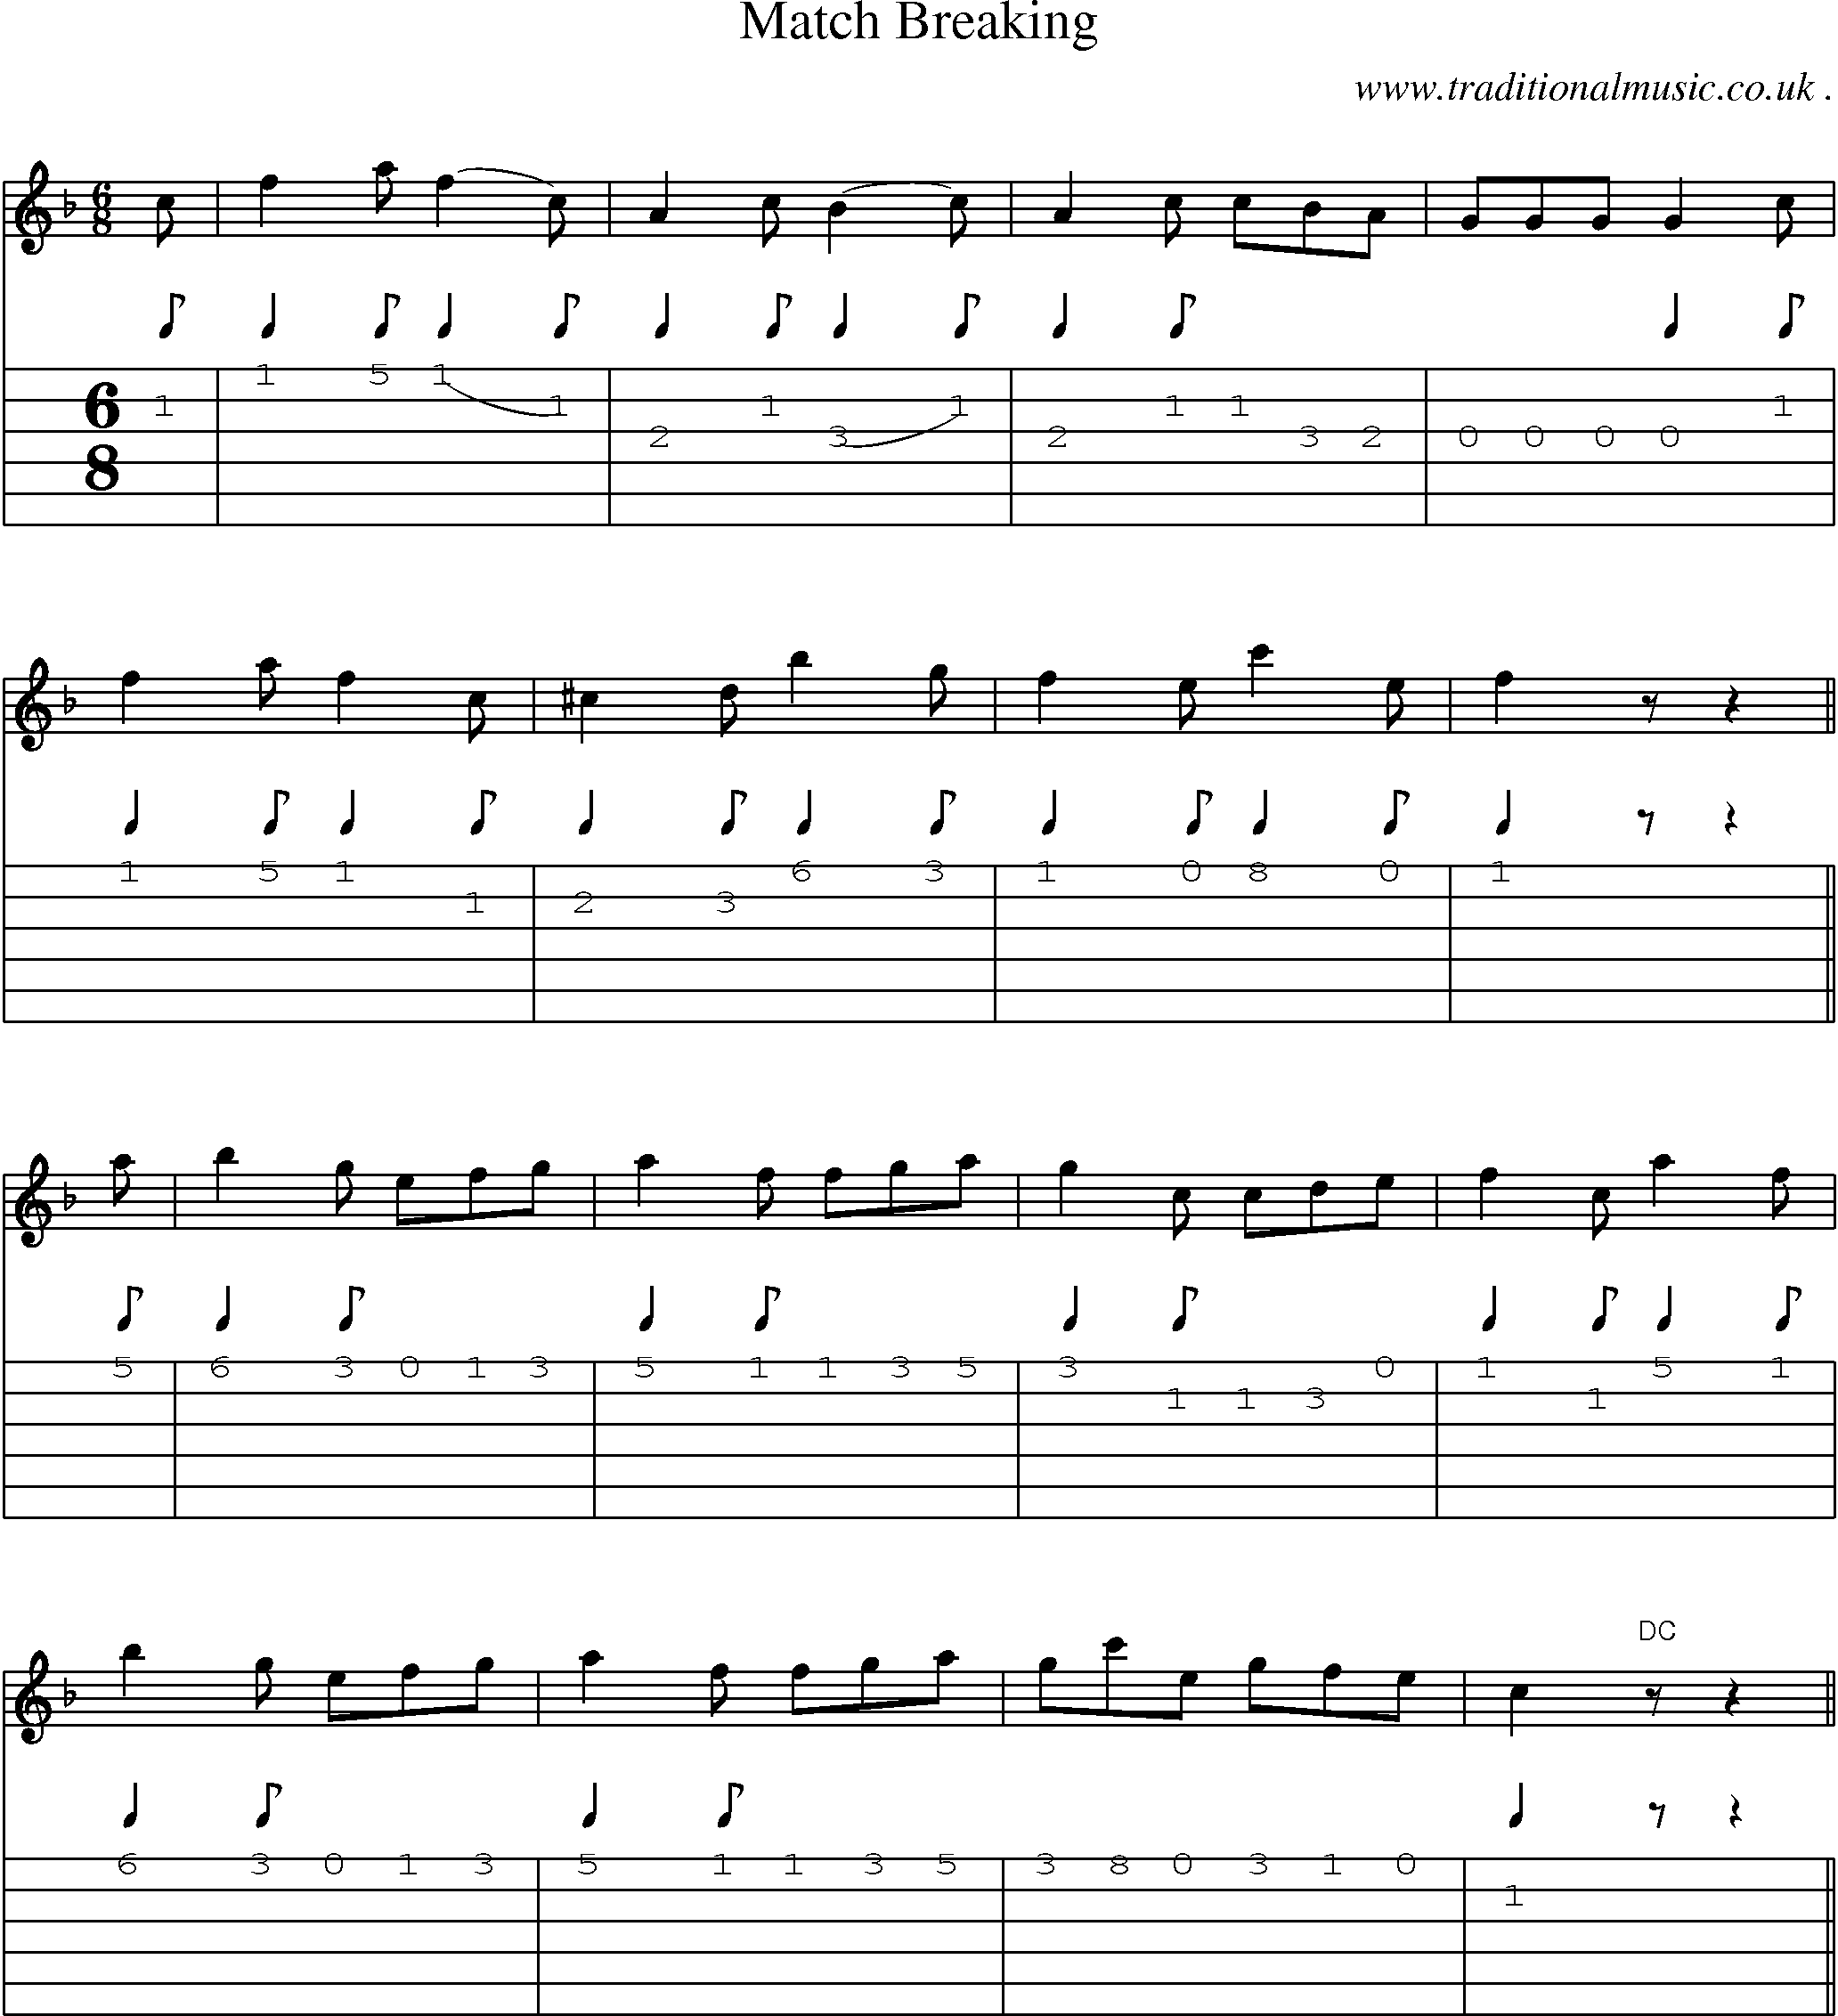 Sheet-Music and Guitar Tabs for Match Breaking